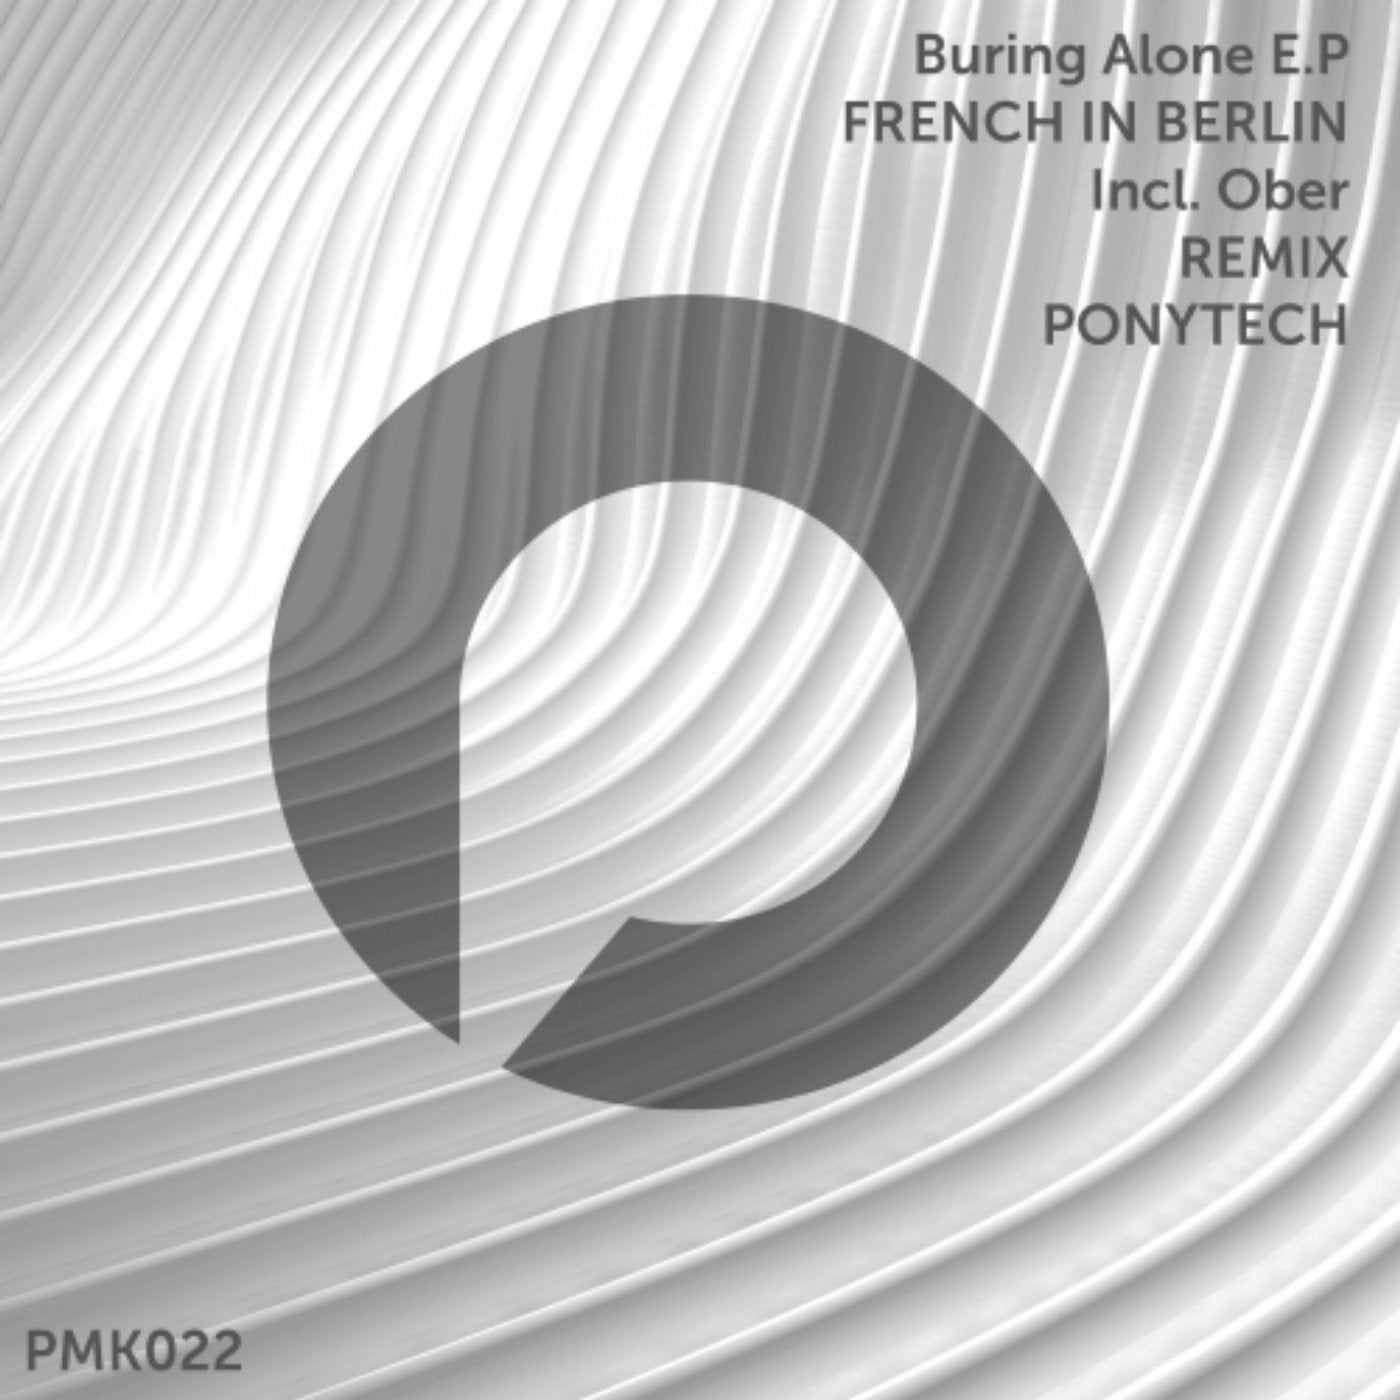 Buring Alone EP